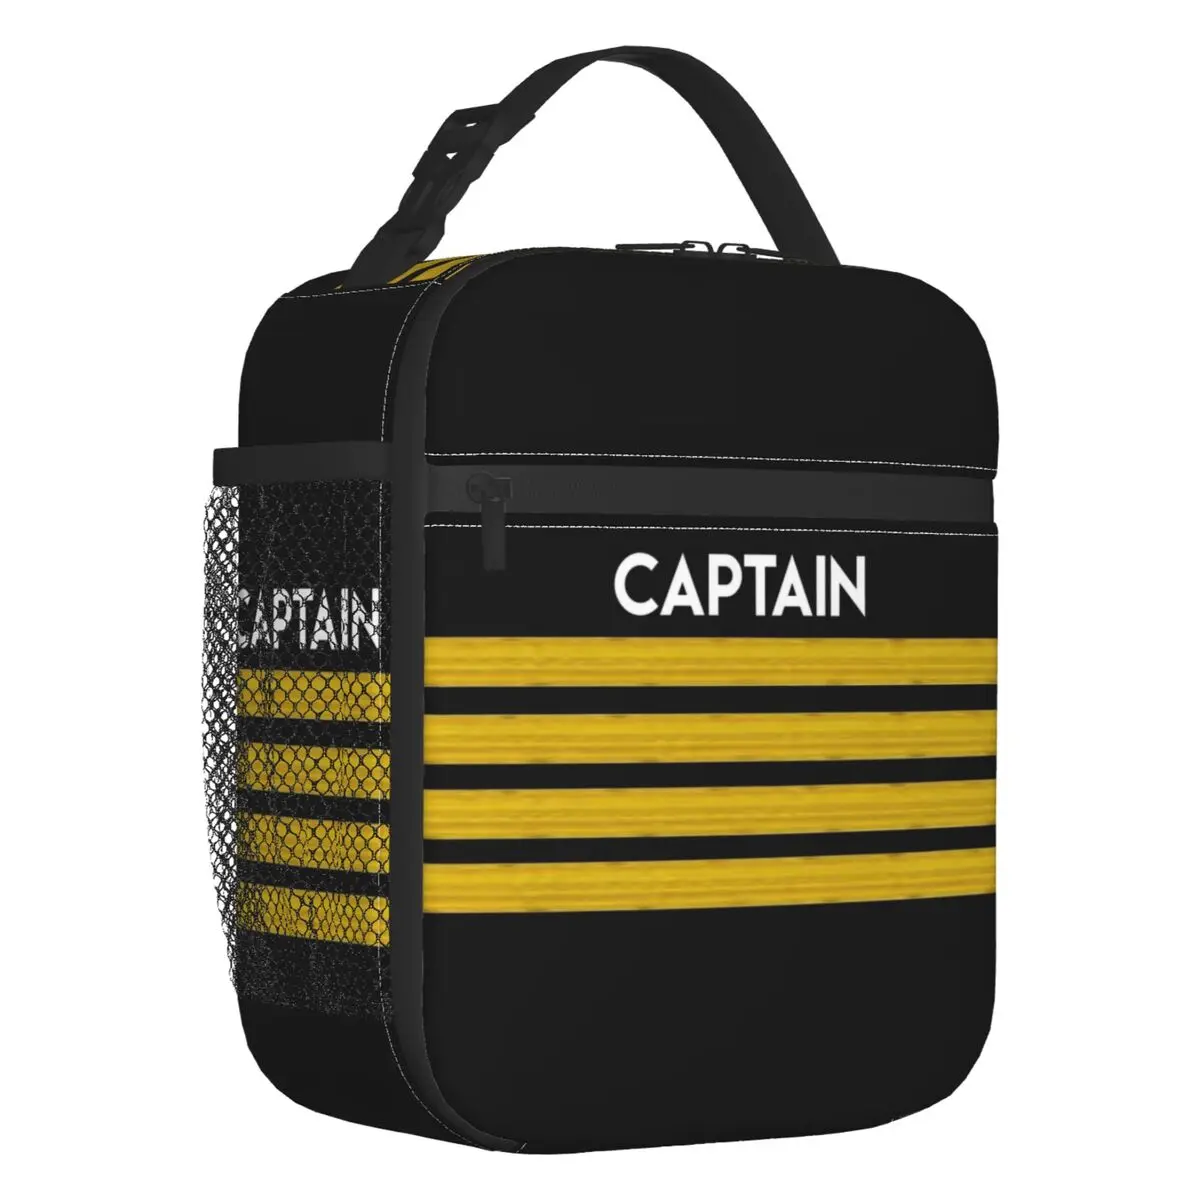 Captain Stripes Epaulettes Insulated Lunch Bags for School Office Aviation Airplane Pilot Thermal Cooler Bento Box Women Kids